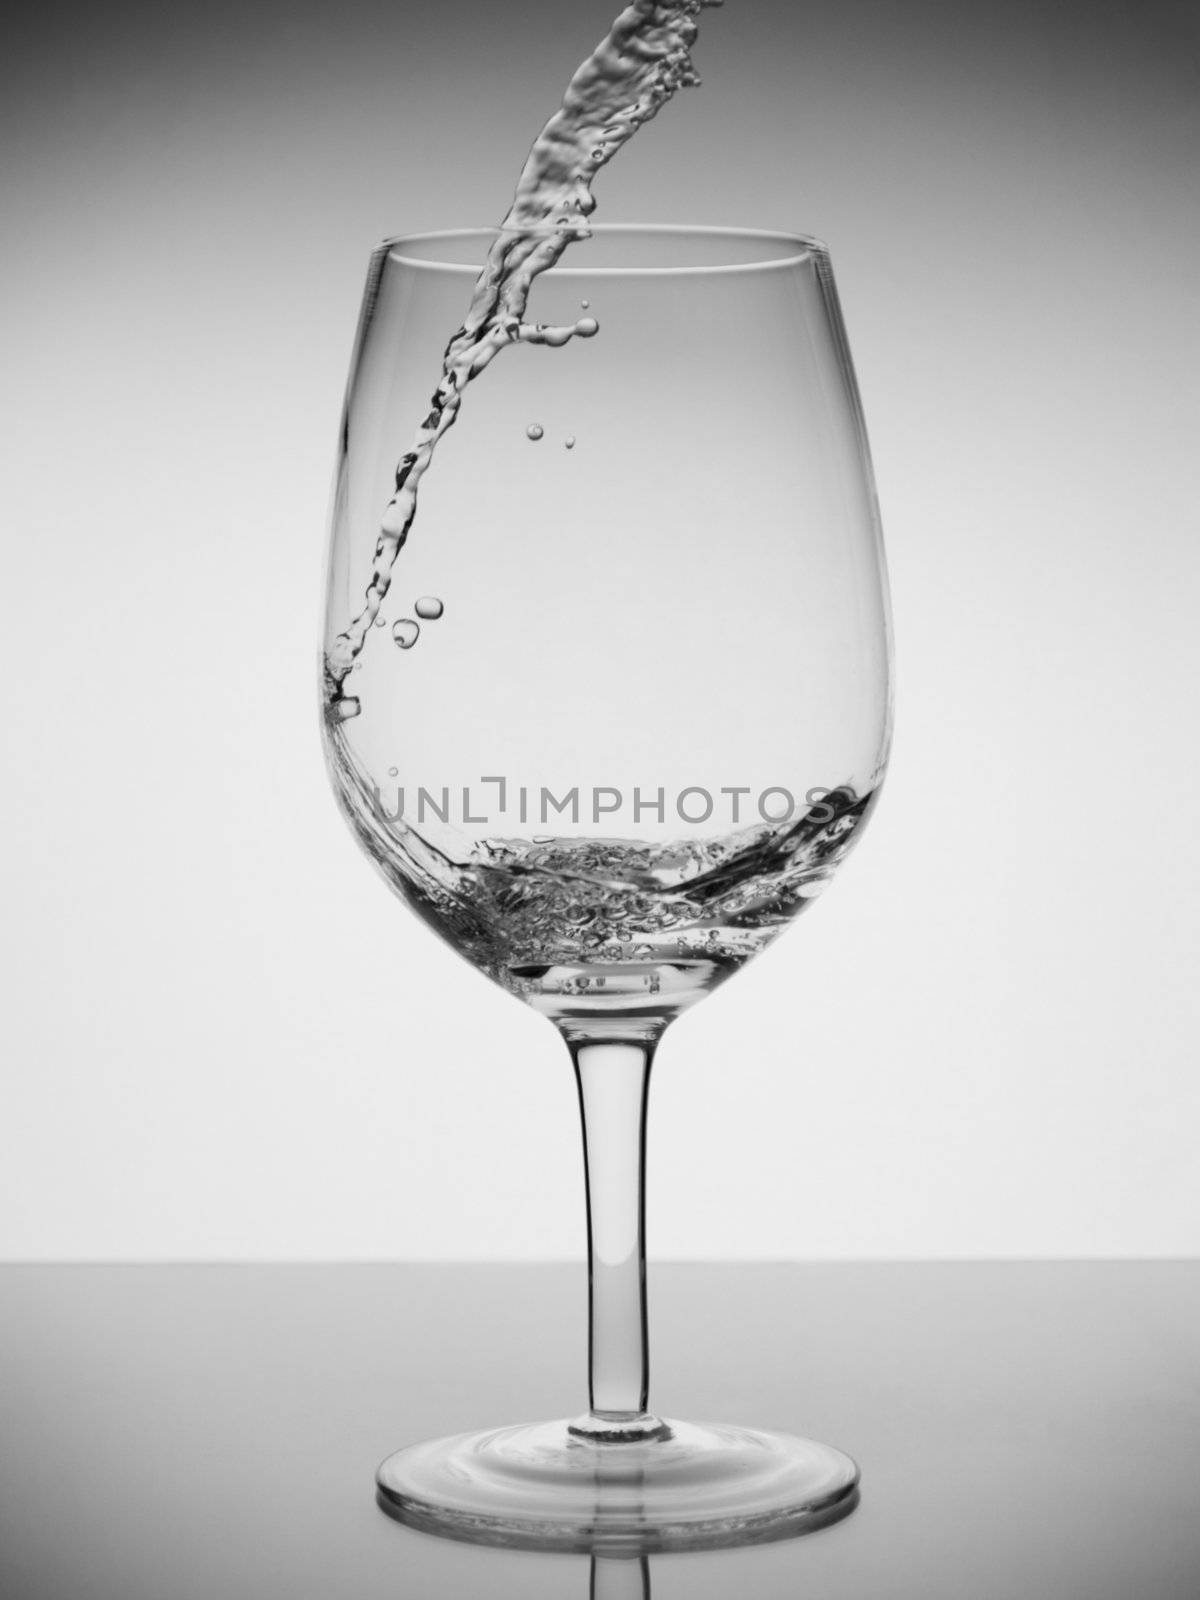 Water being poured into a glass with reflection on white background.